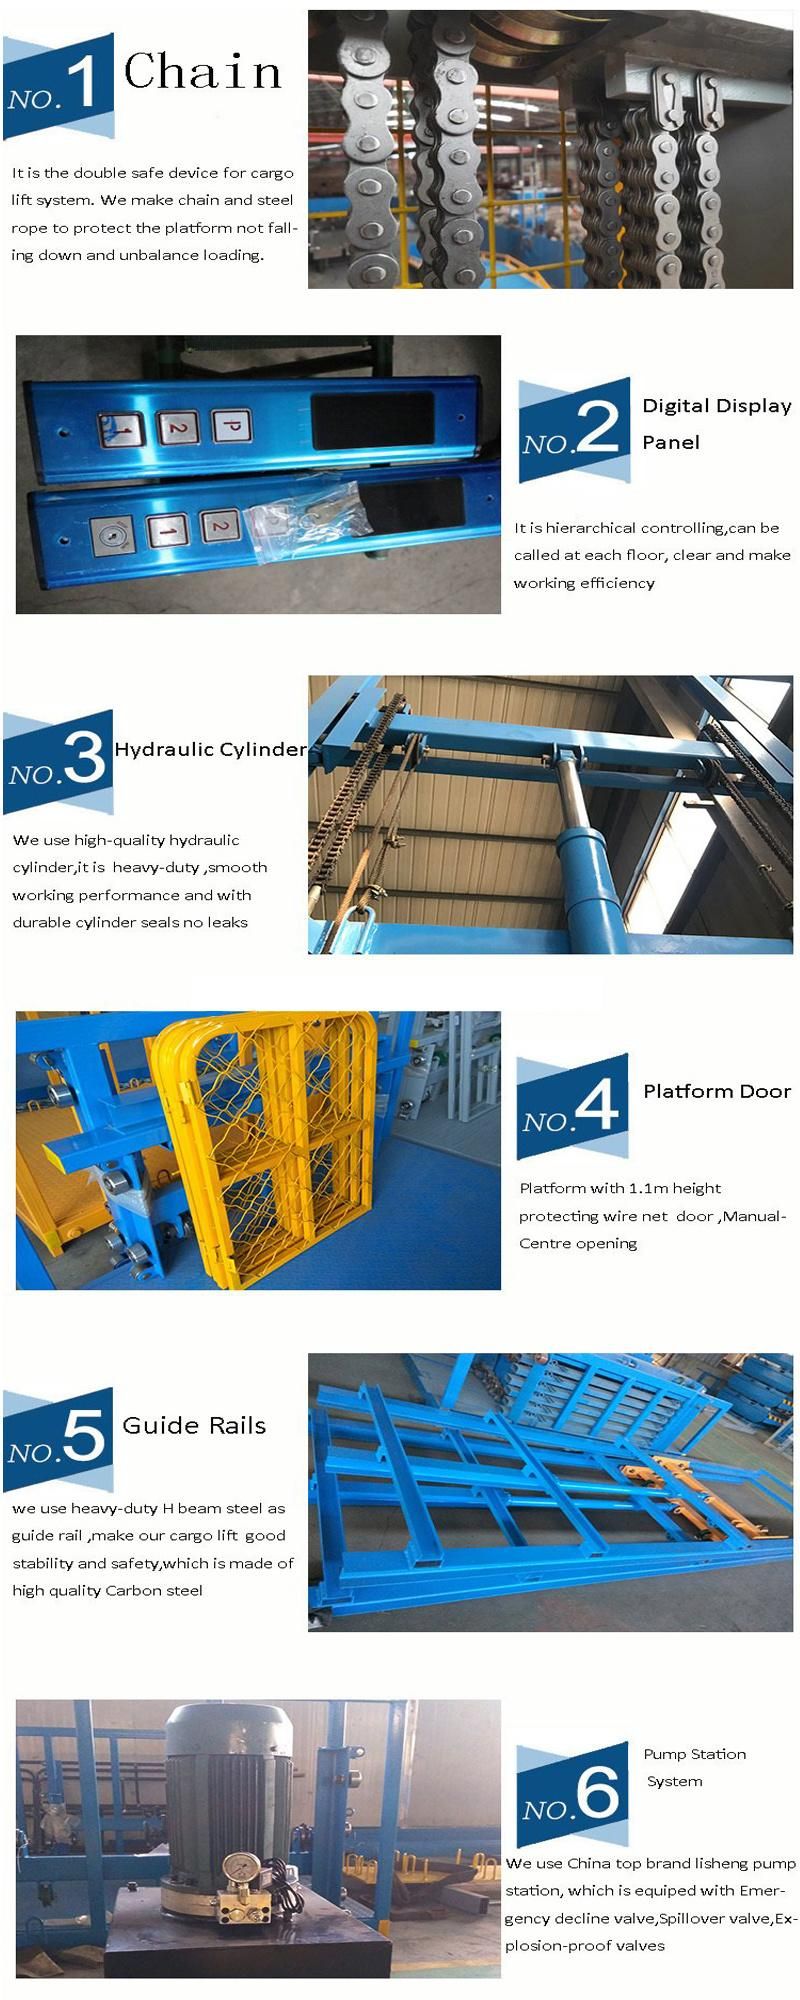 Vertical Guide Rail Hydraulic Warehouse Cargo Lift Price for Construct or Warehouse